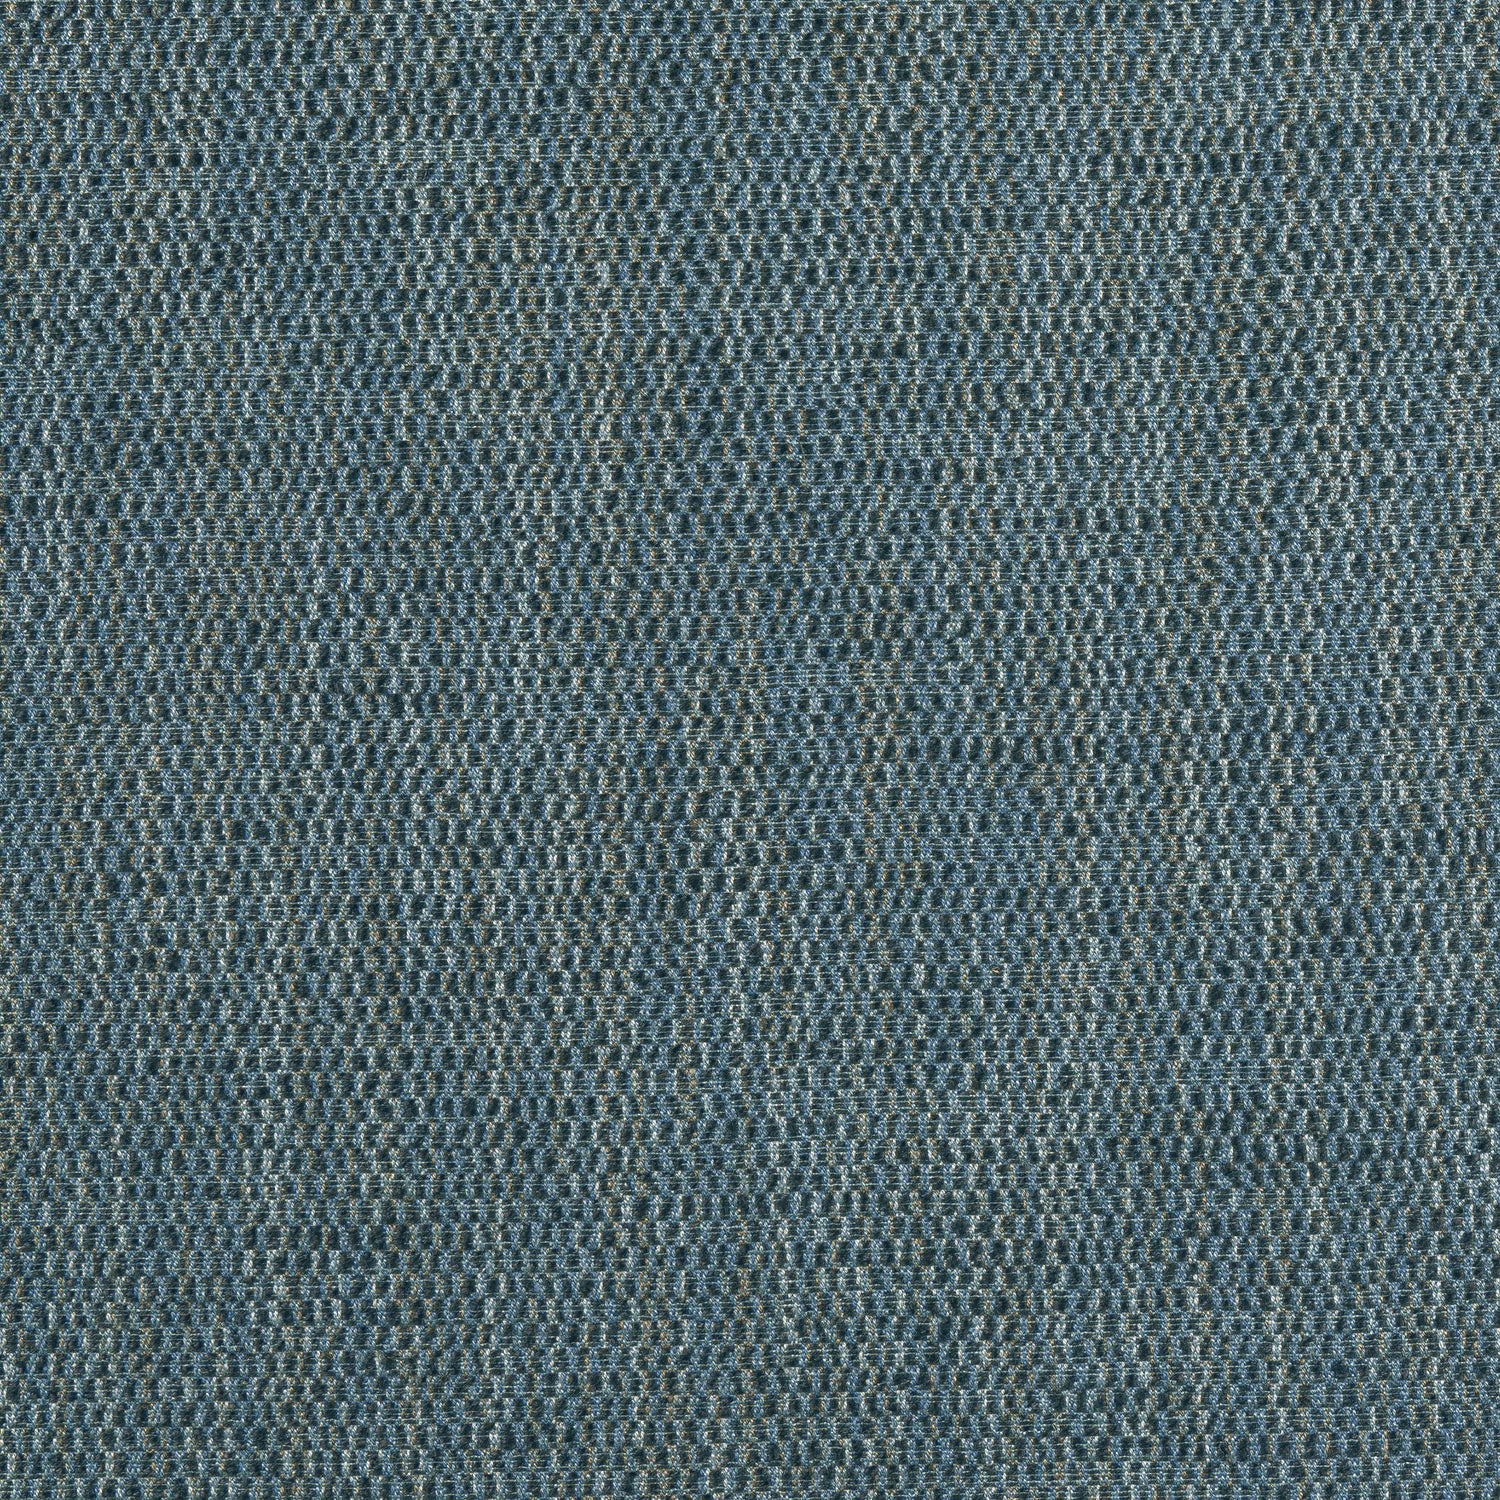 Rito fabric in mineral color - pattern number W8119 - by Thibaut in the Sereno collection